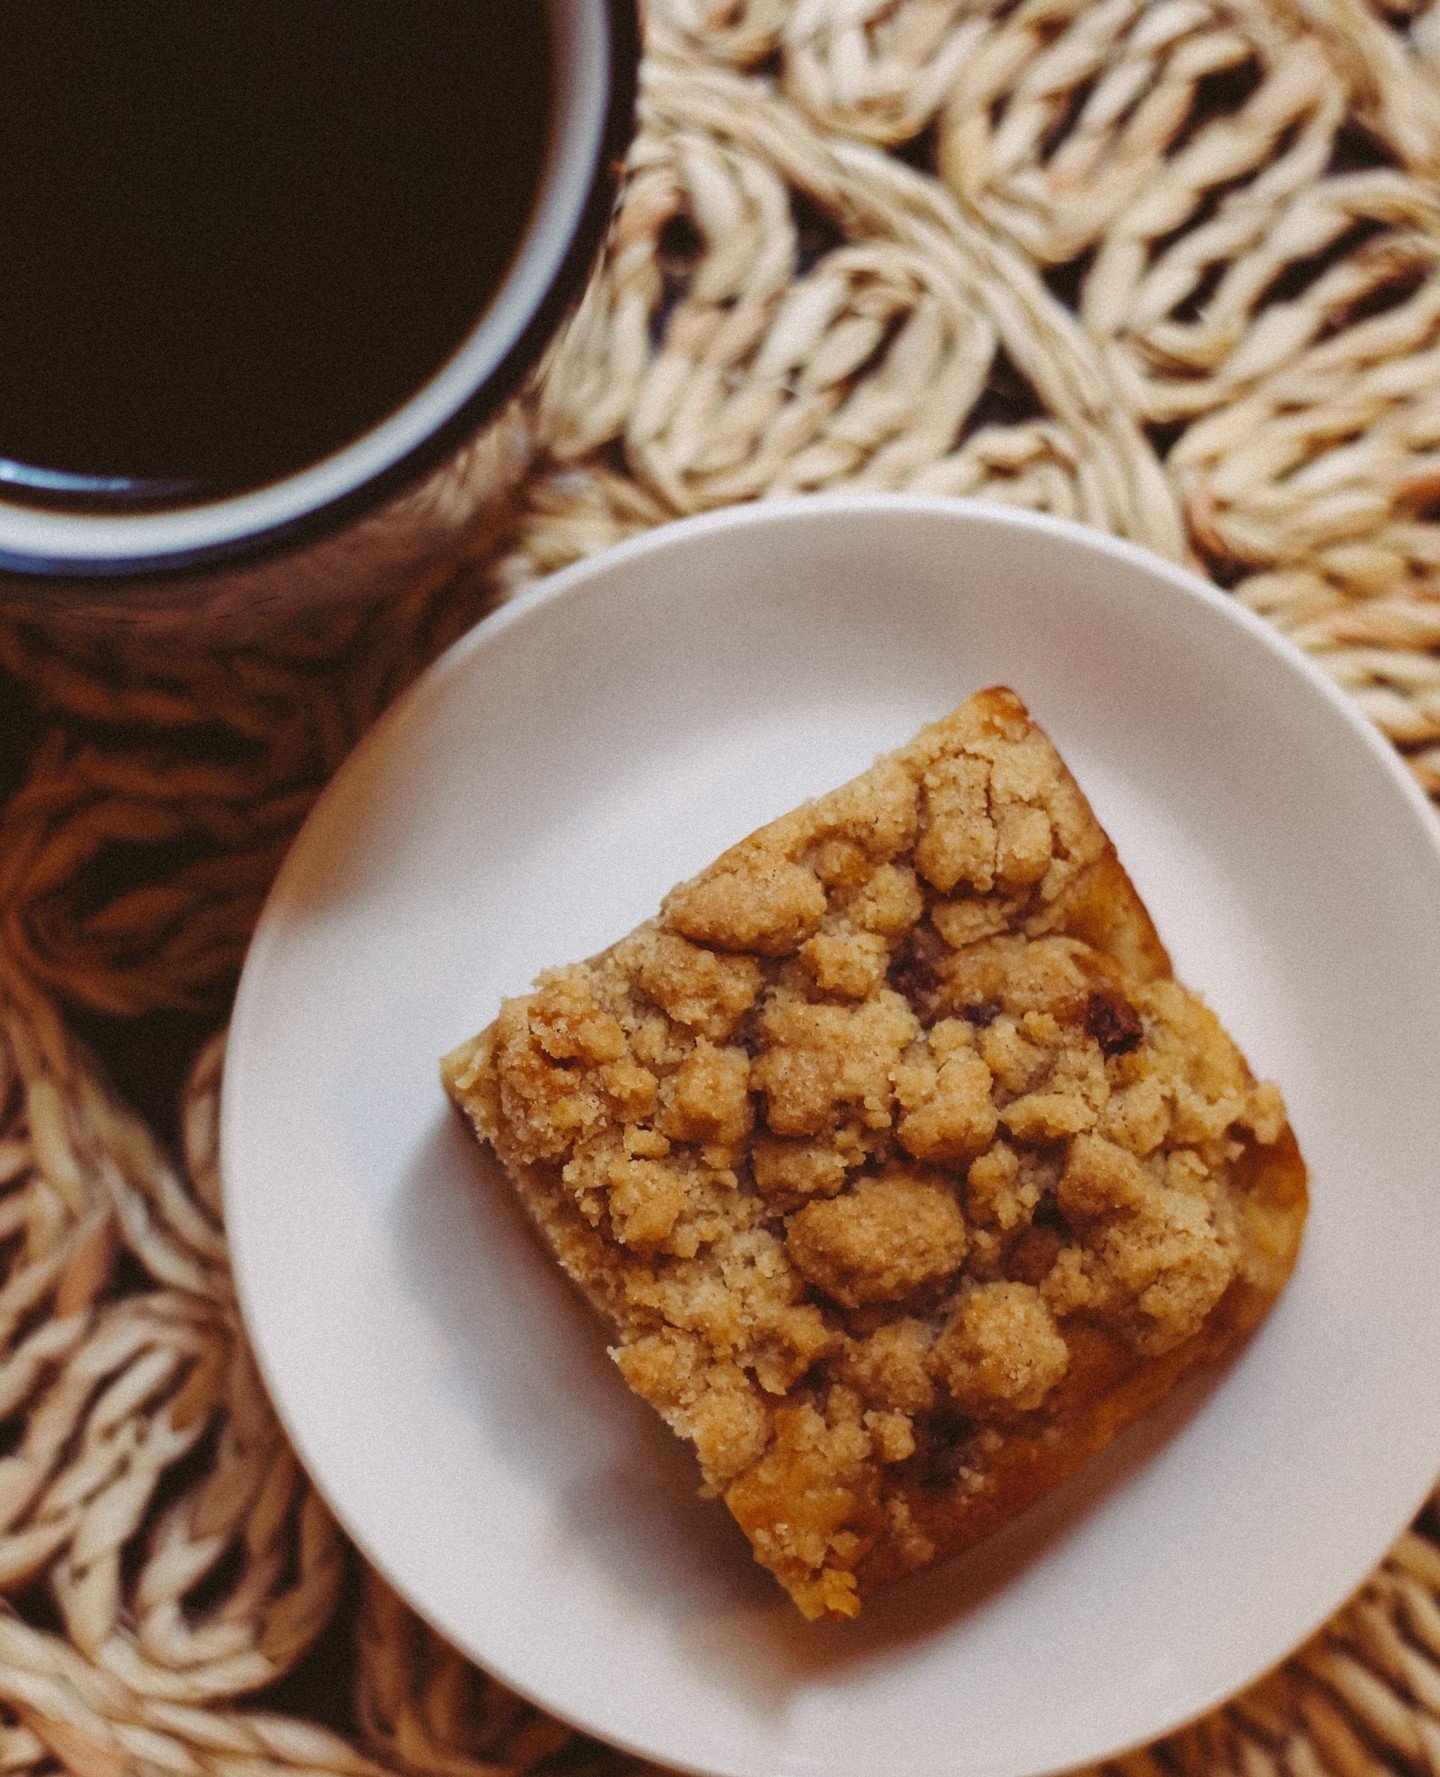 Homemade crumb cake is the perfect accessory to any cup of Feine! What's your favorite Feine Crumb Cake flavor?!?!⁠
⁠
#drinkfeine #crumbcake #pastry #coffee #coffeeshop ⁠
#bakery #sweettooth #dessert #breakfast #desserts